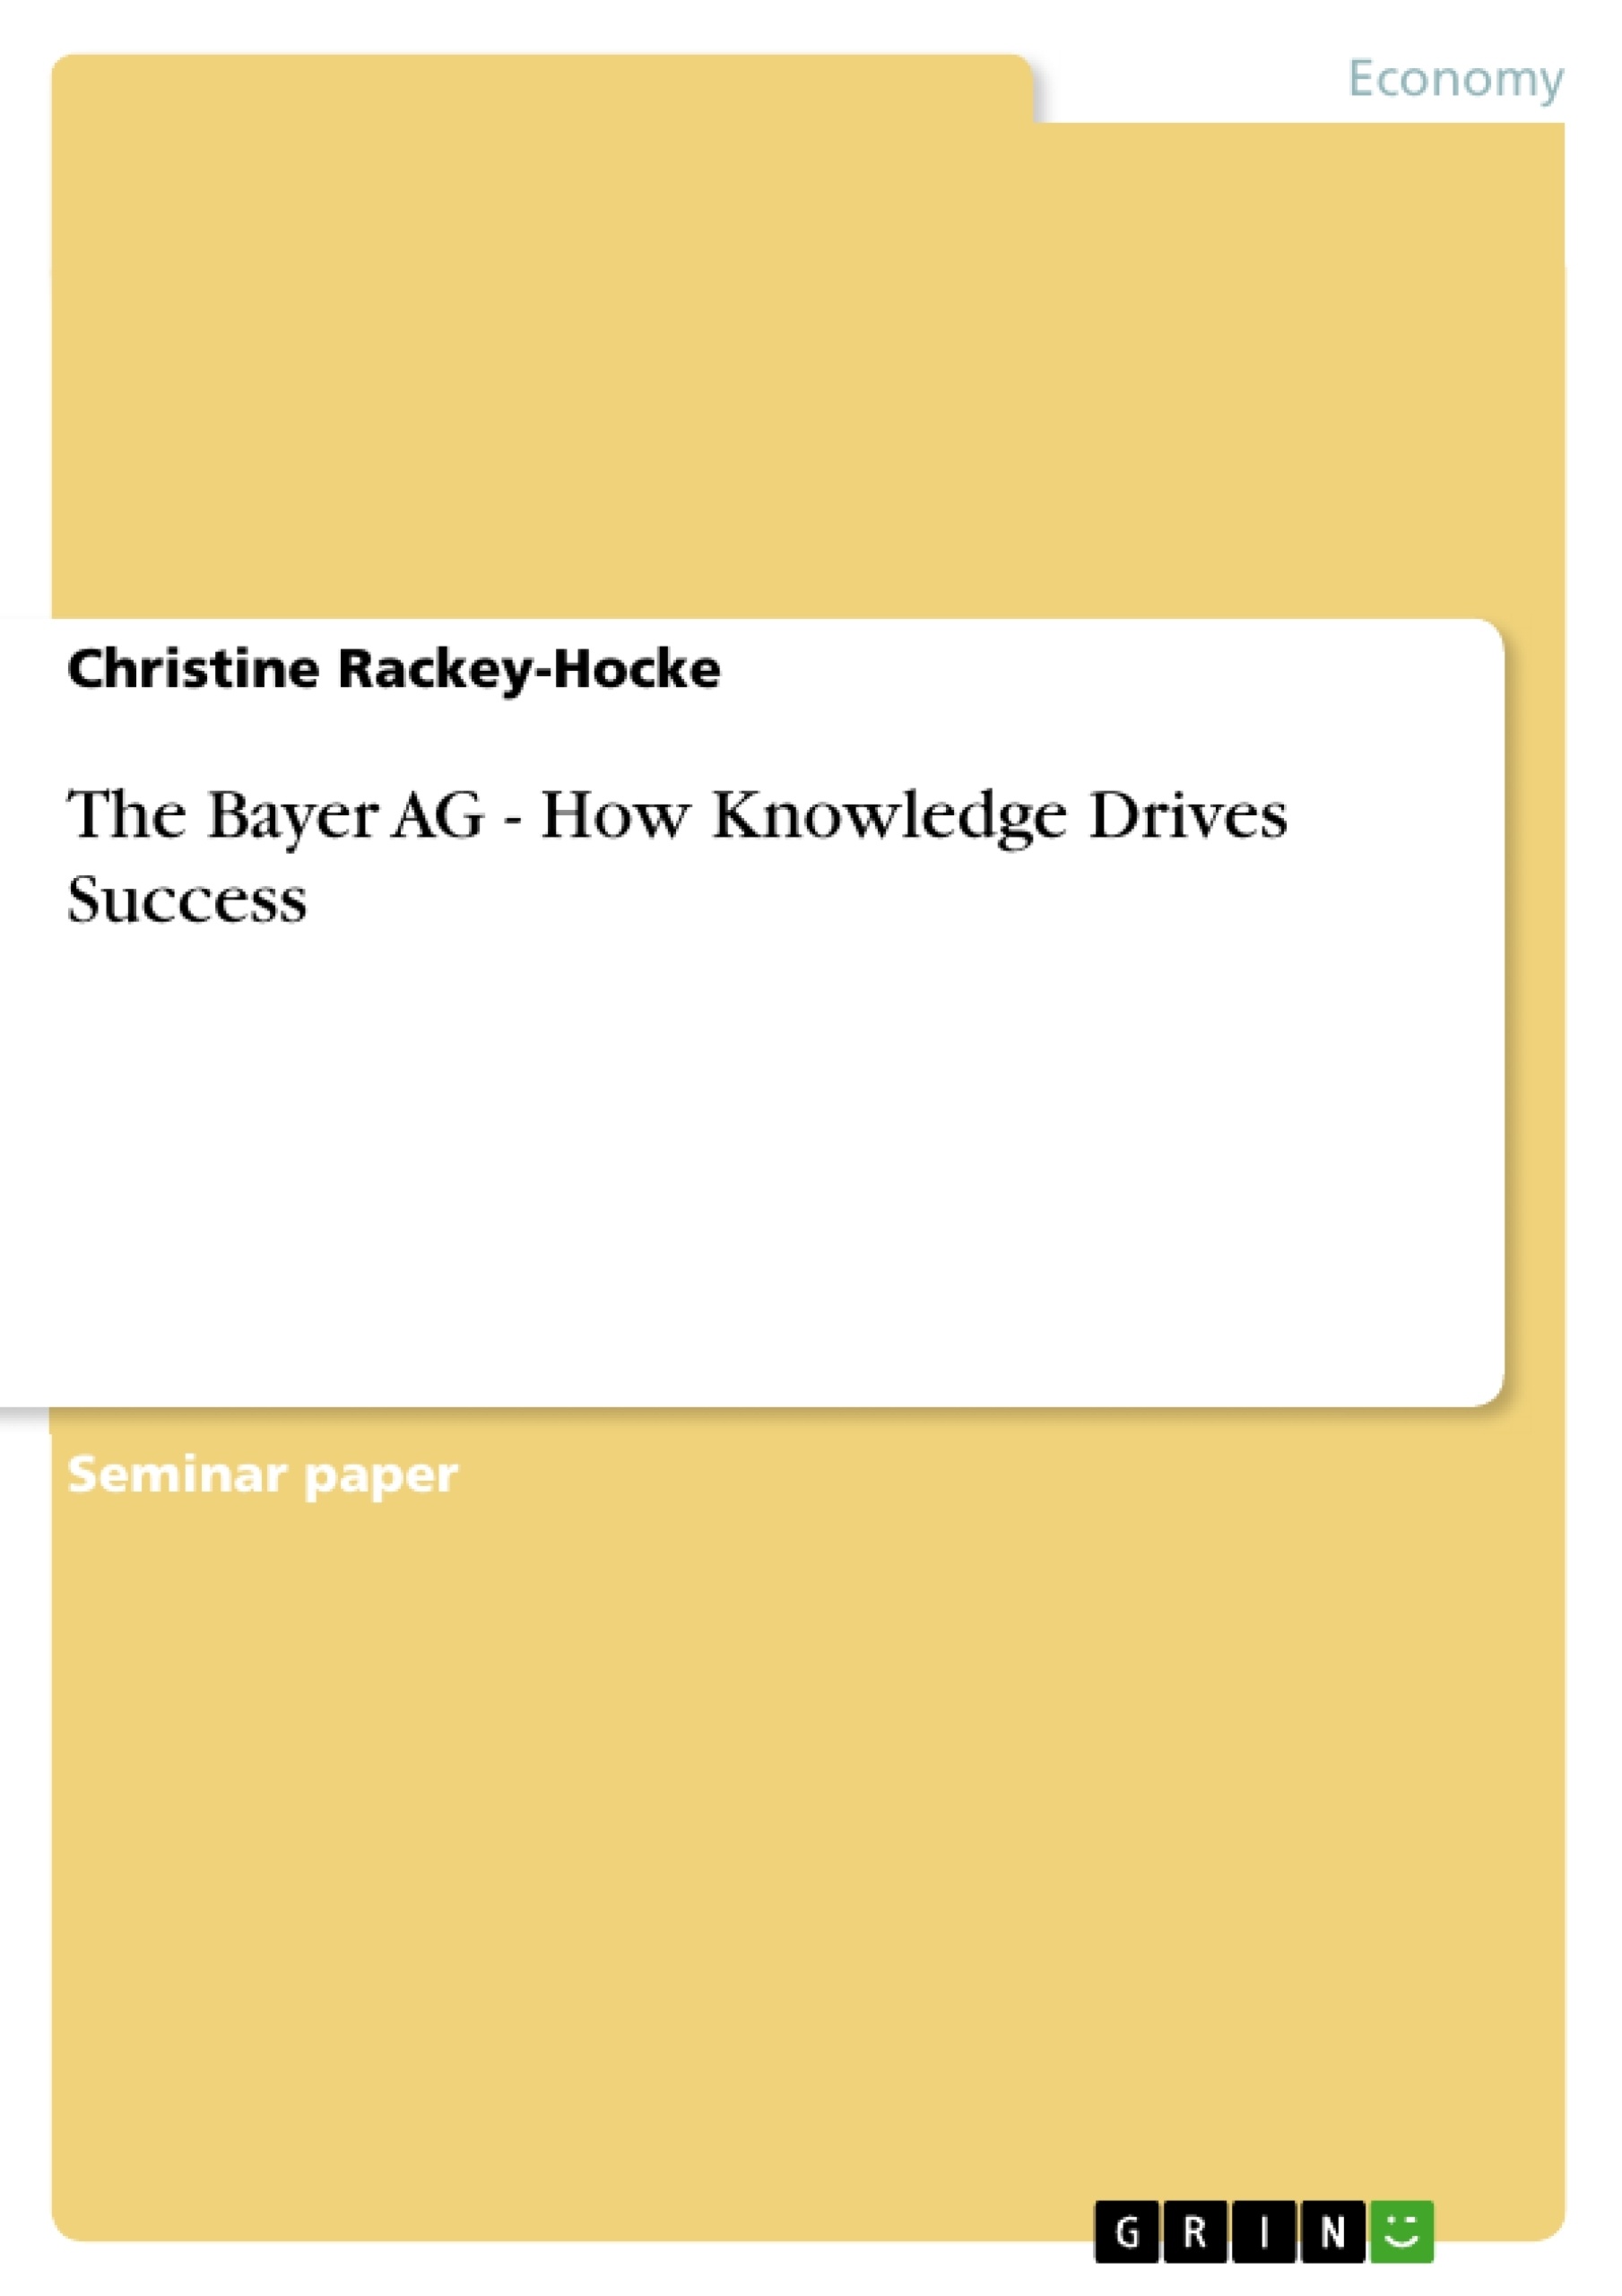 Title: The Bayer AG - How Knowledge Drives Success